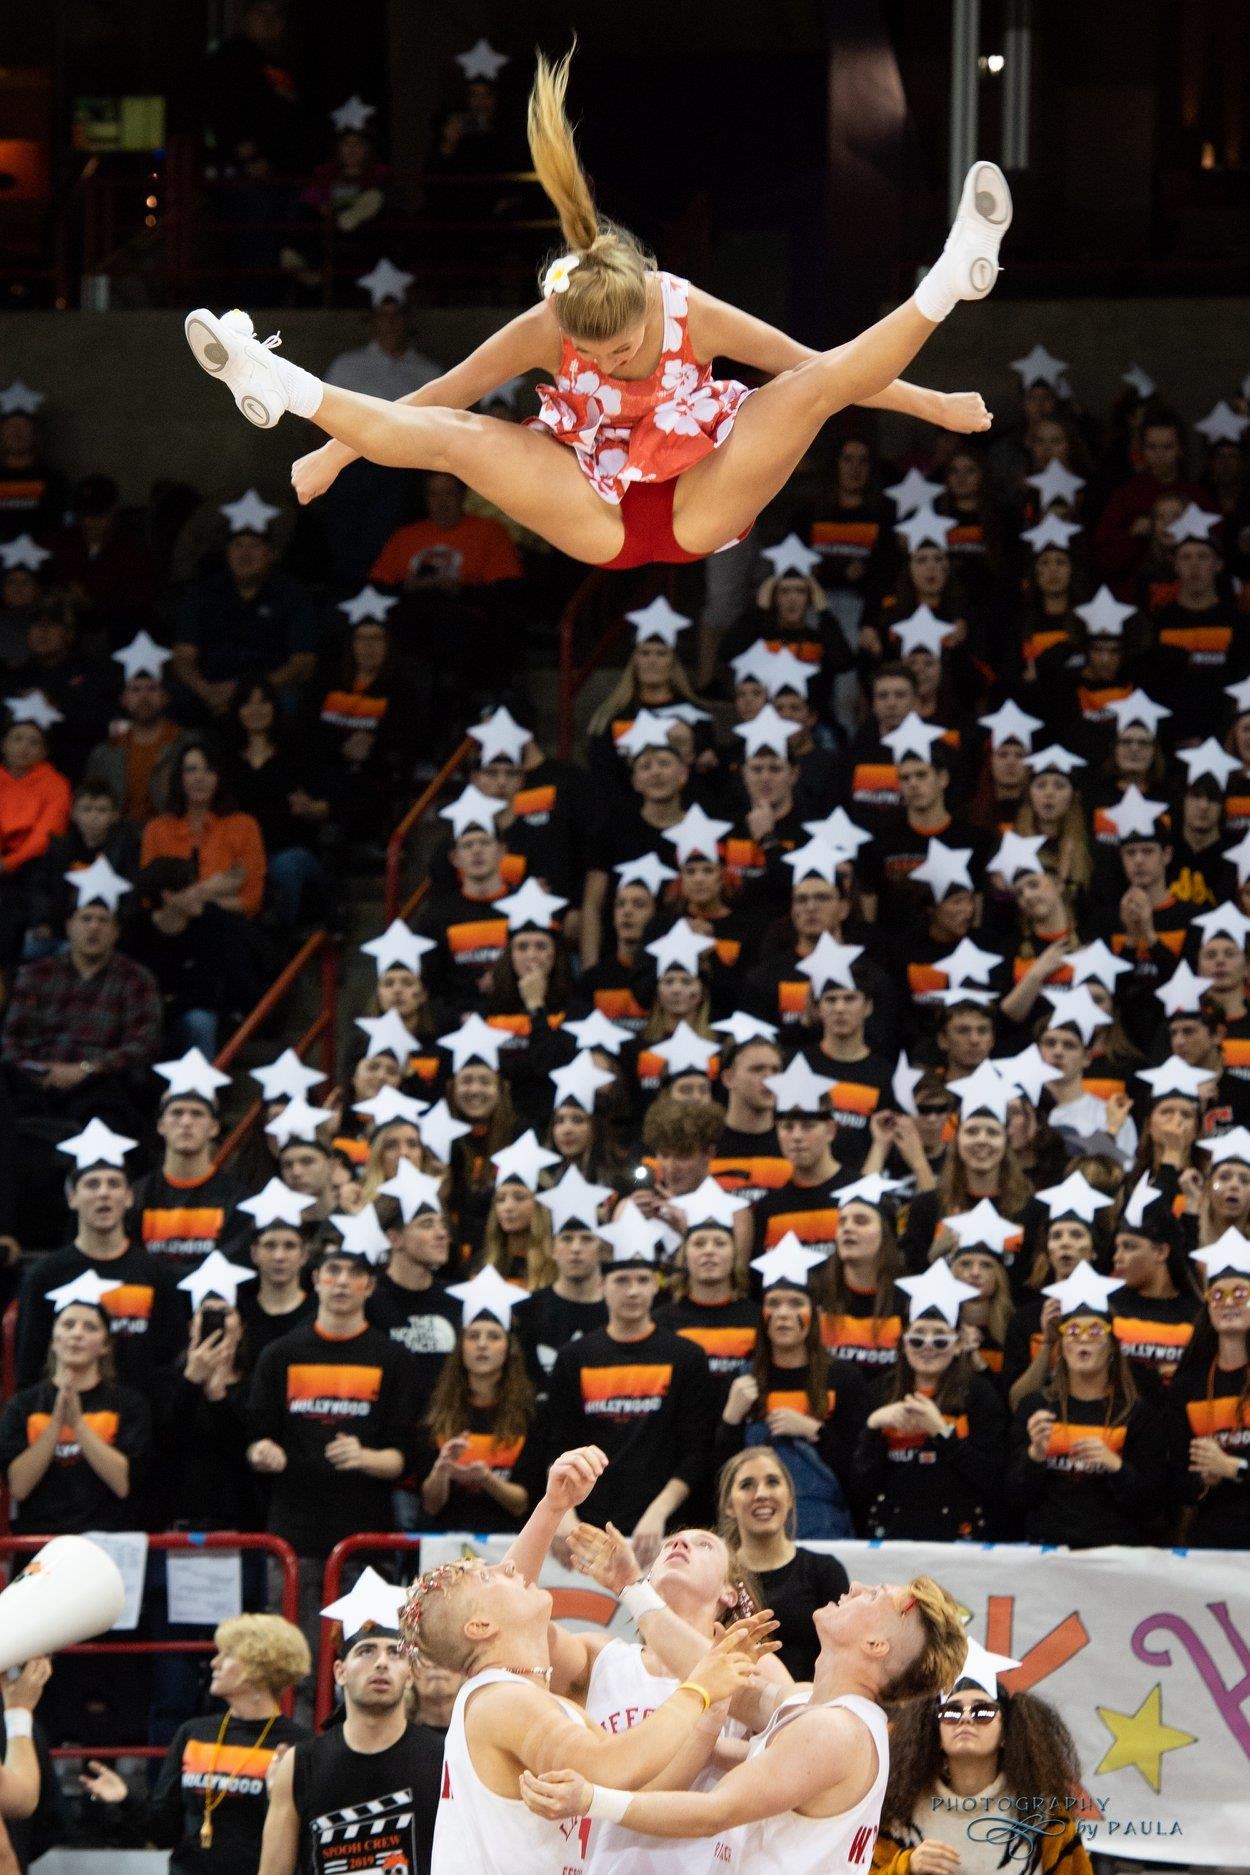 Photo of cheerleader performing basket toss toe touch